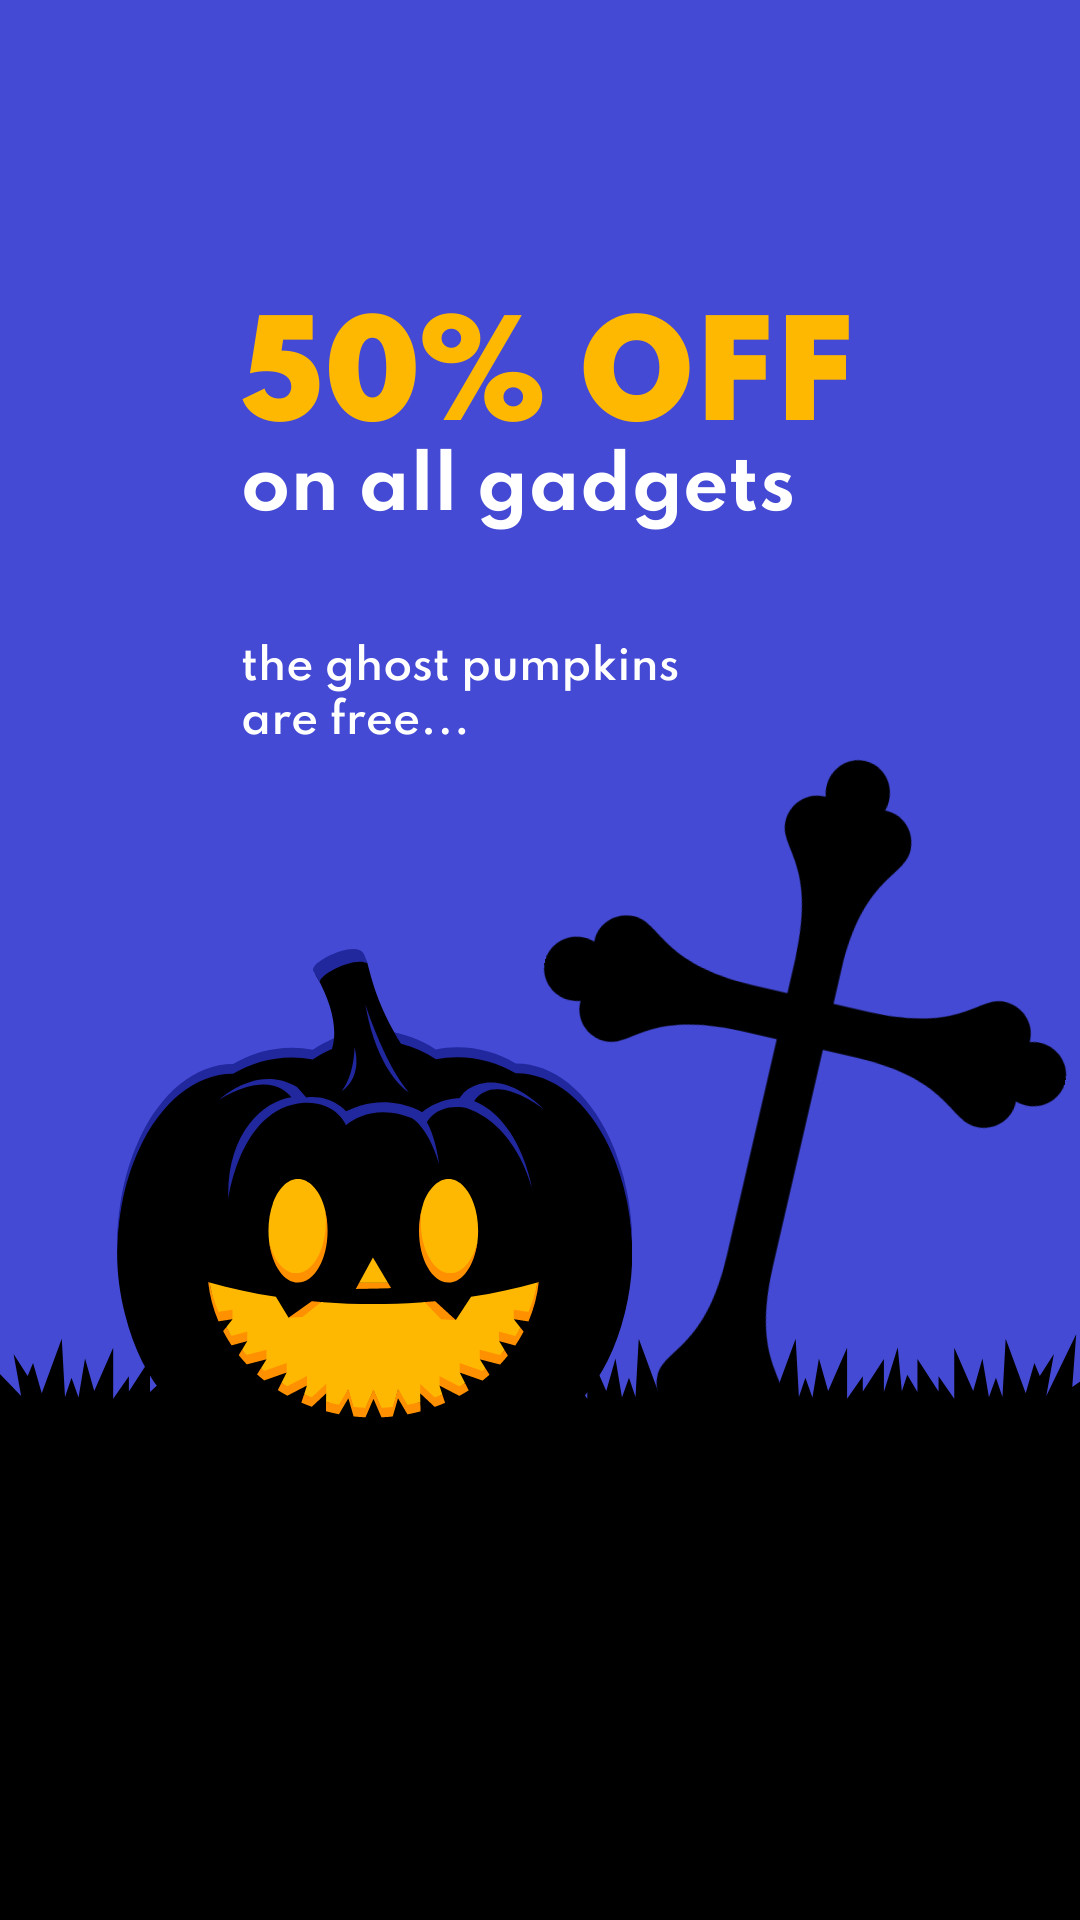 Gadget Sale with Free Ghost Pumpkins